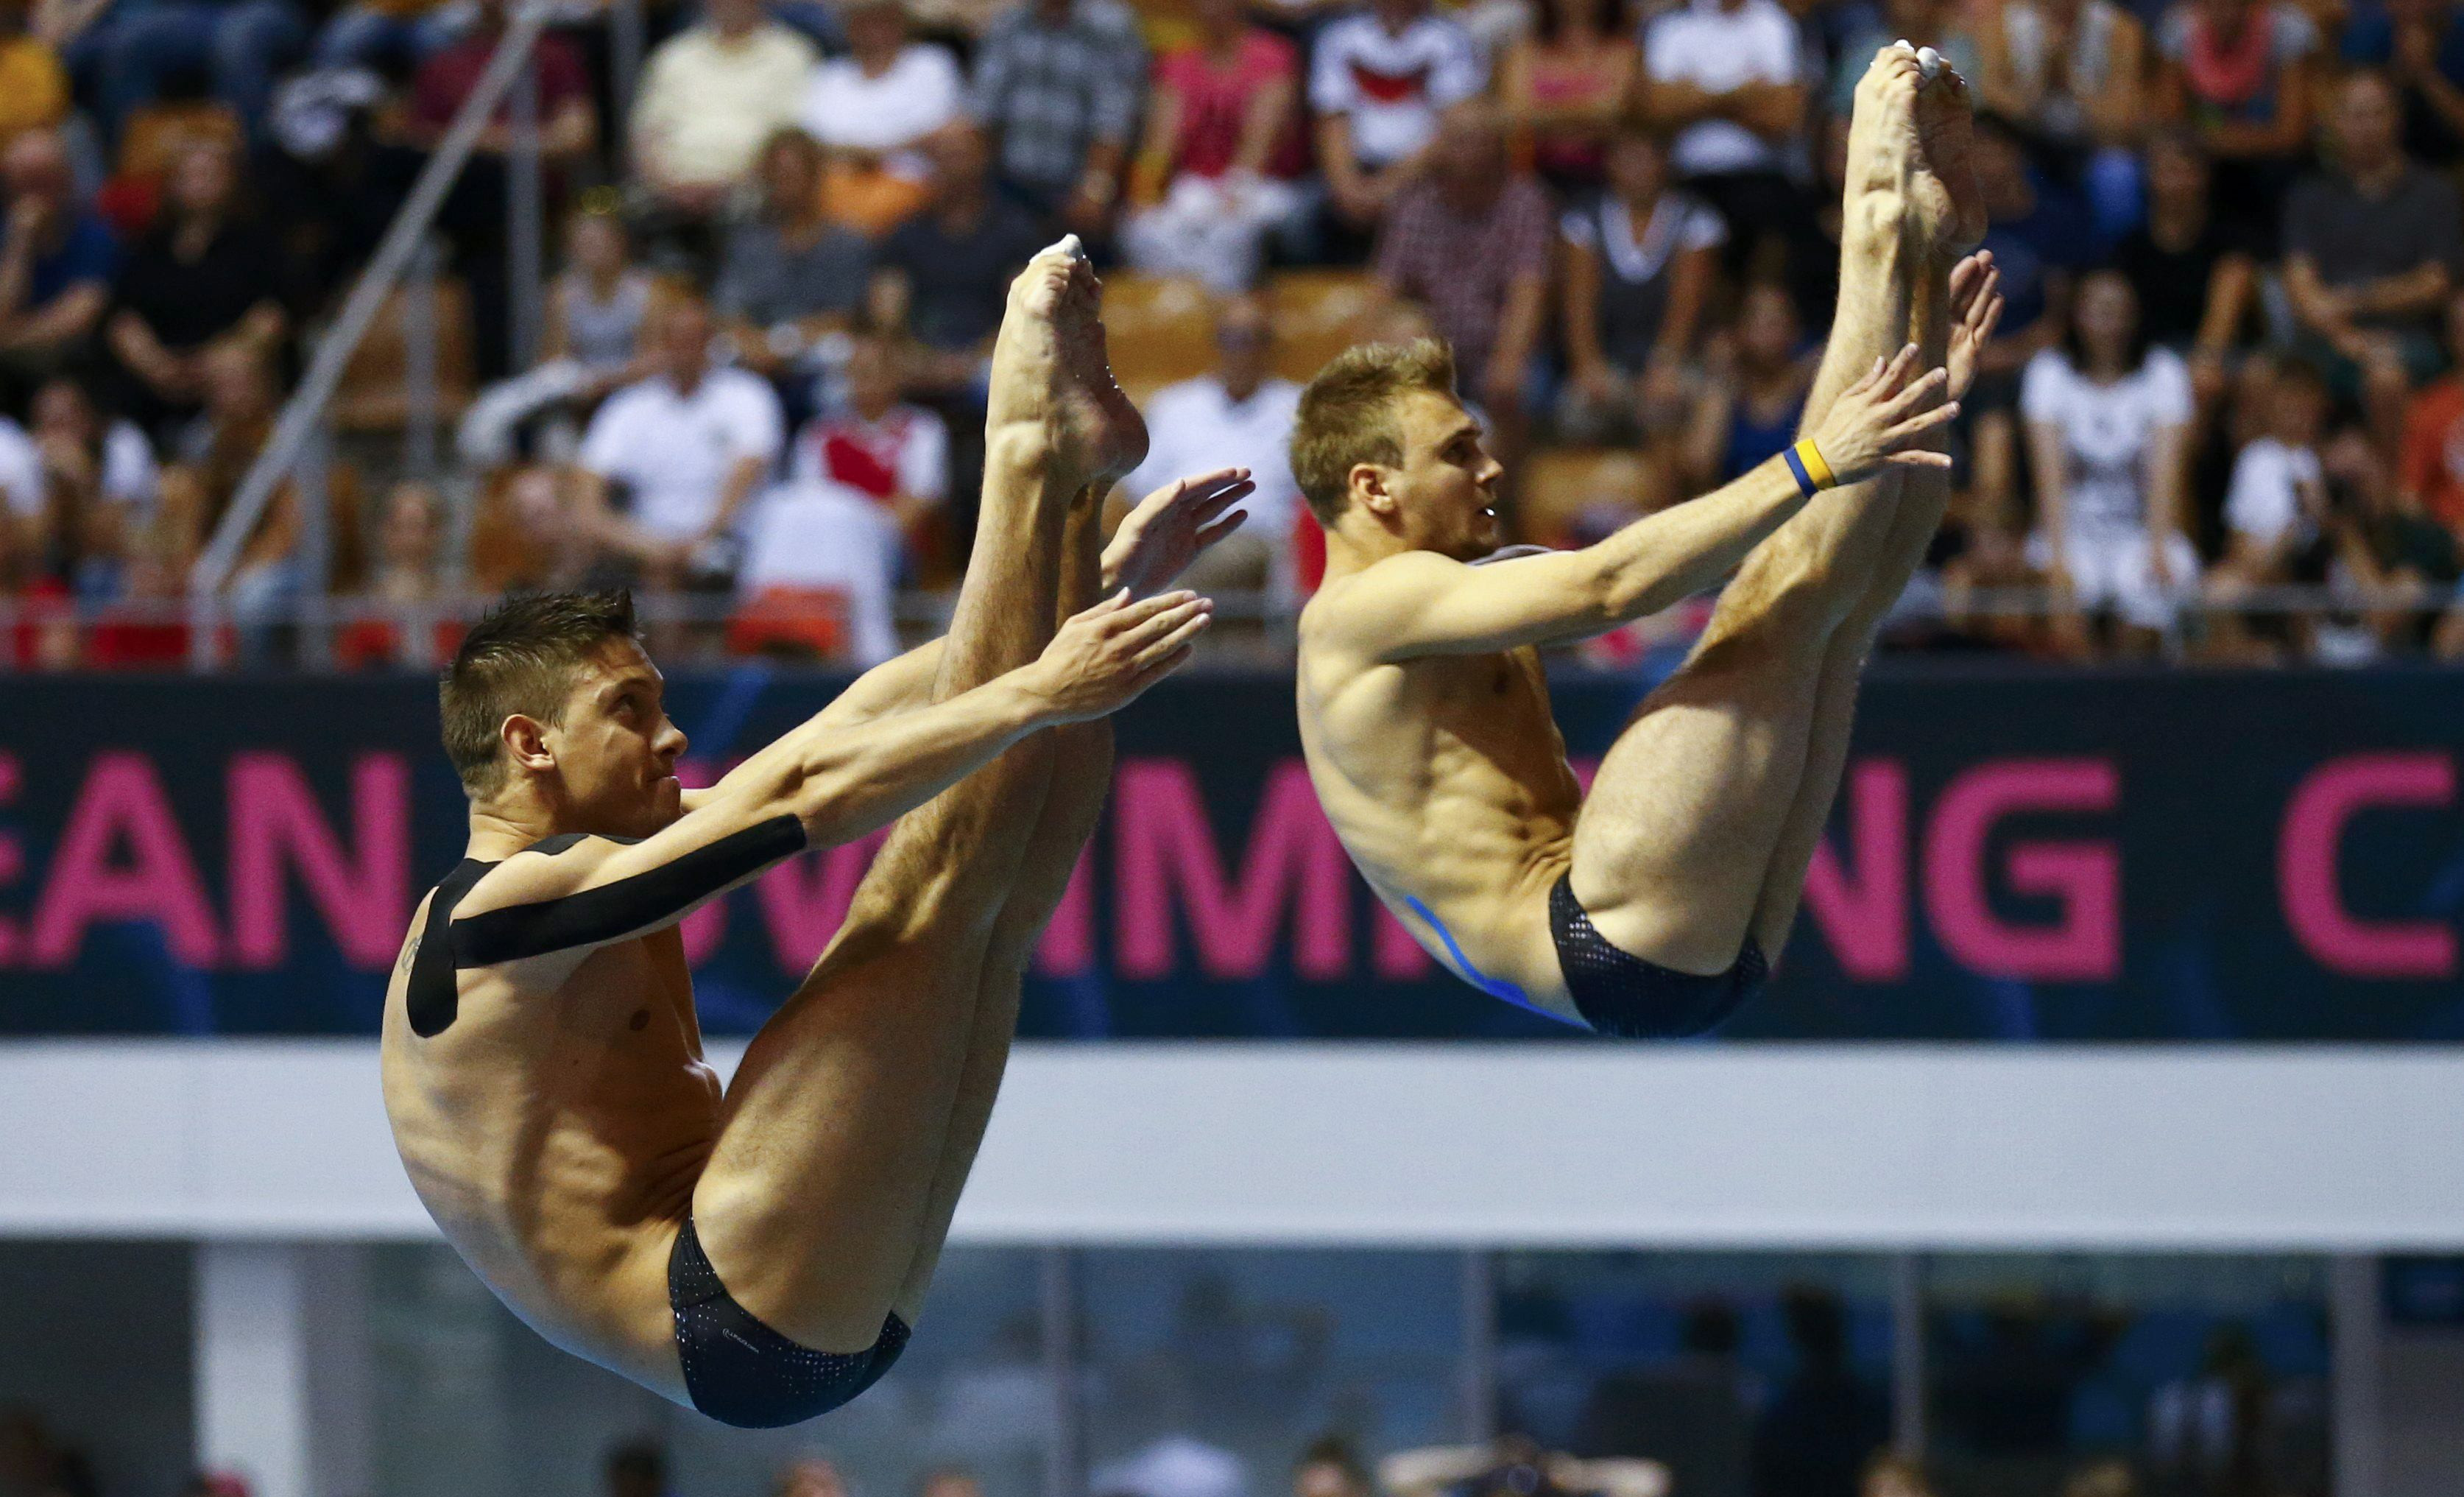 Gorshkovozov and Kvasha of Ukraine dive to place third in synchronised 3m springboard final at the European Swimming Championships in Berlin